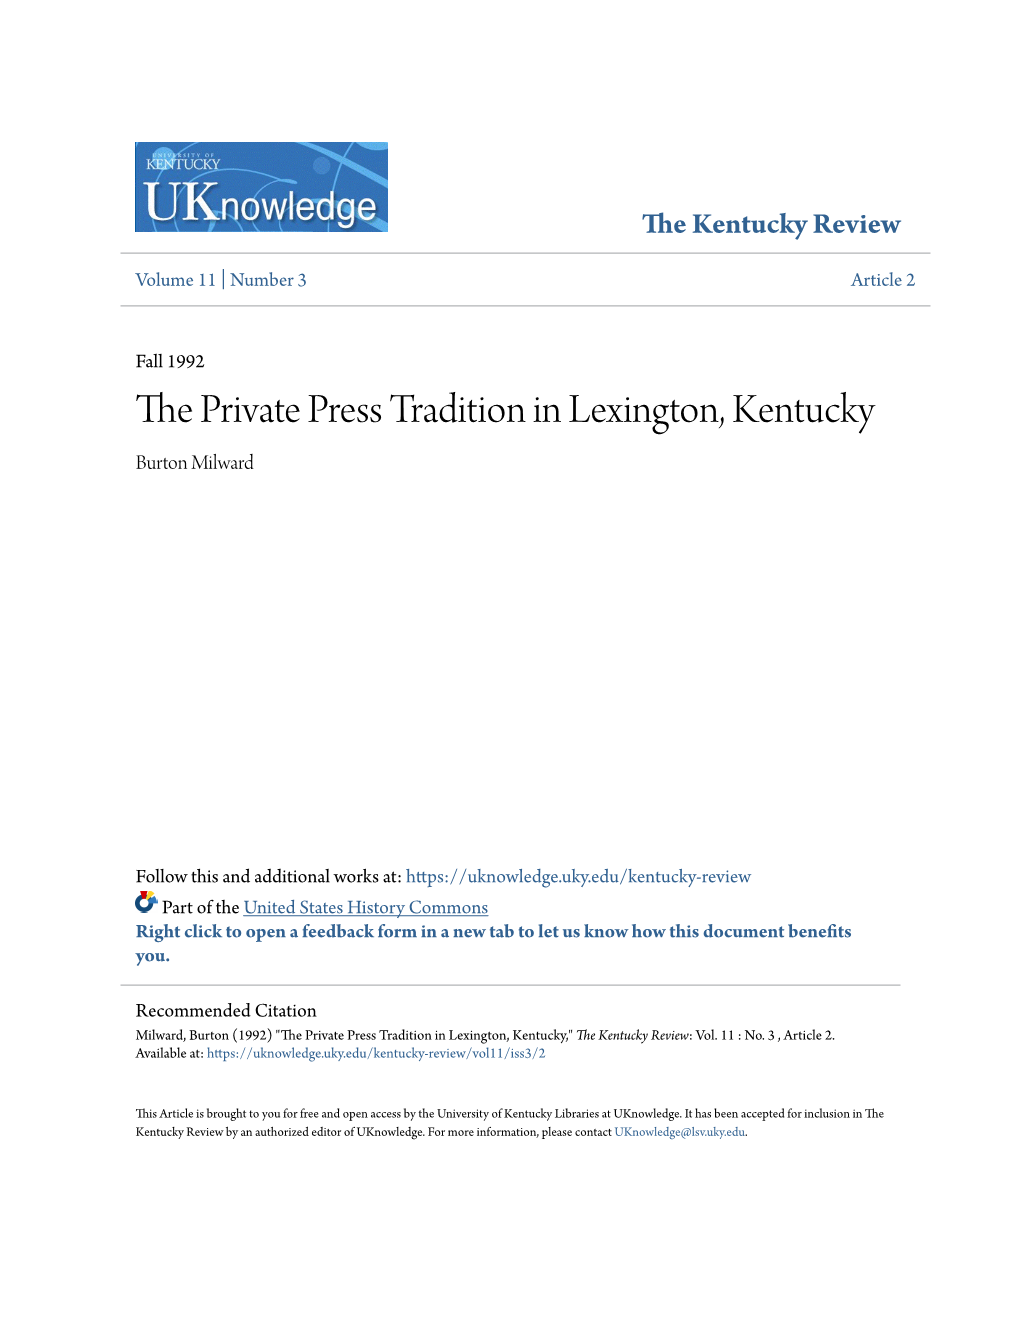 The Private Press Tradition in Lexington, Kentucky